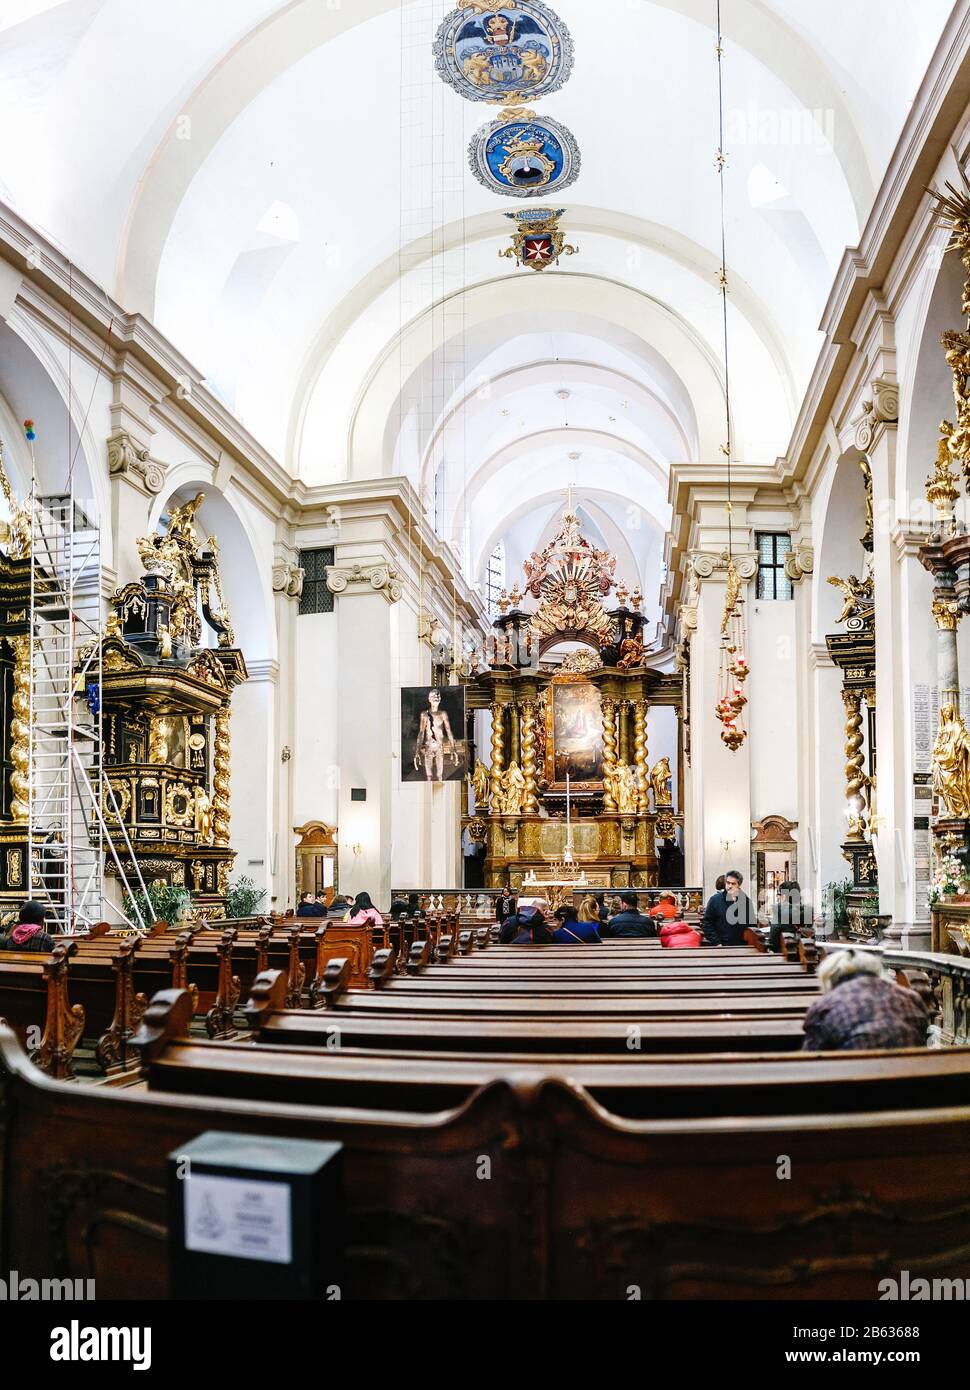 PRAGUE, CZECH REPUBLIC, 19 MARCH 2017: Interior of Carmelite Church of Our Lady Victorious in Prague. Stock Photo